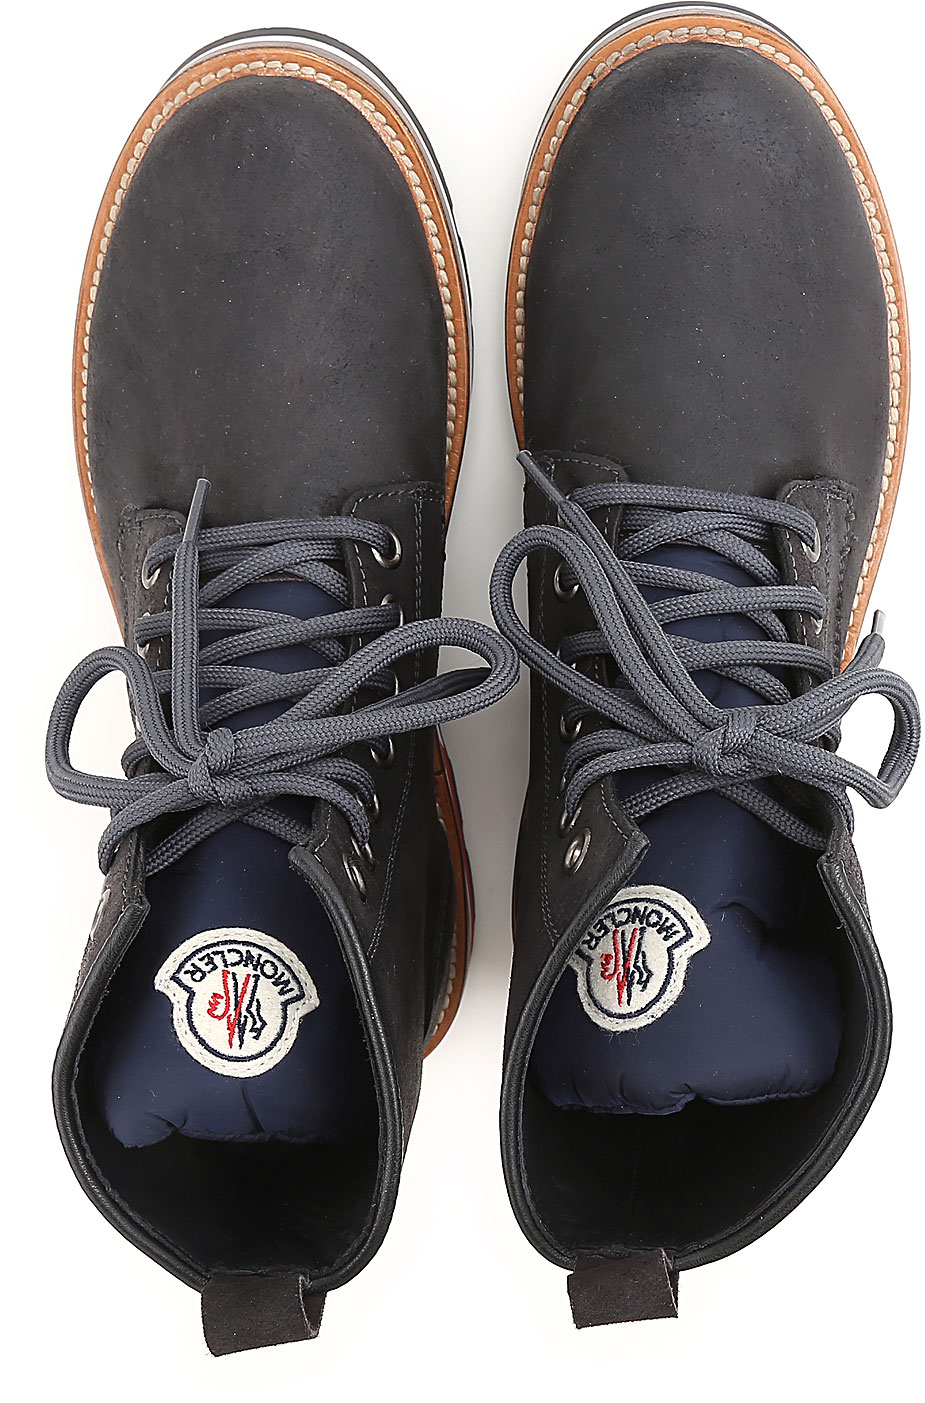 Mens Shoes Moncler, Style code 101620001721928newvancouver